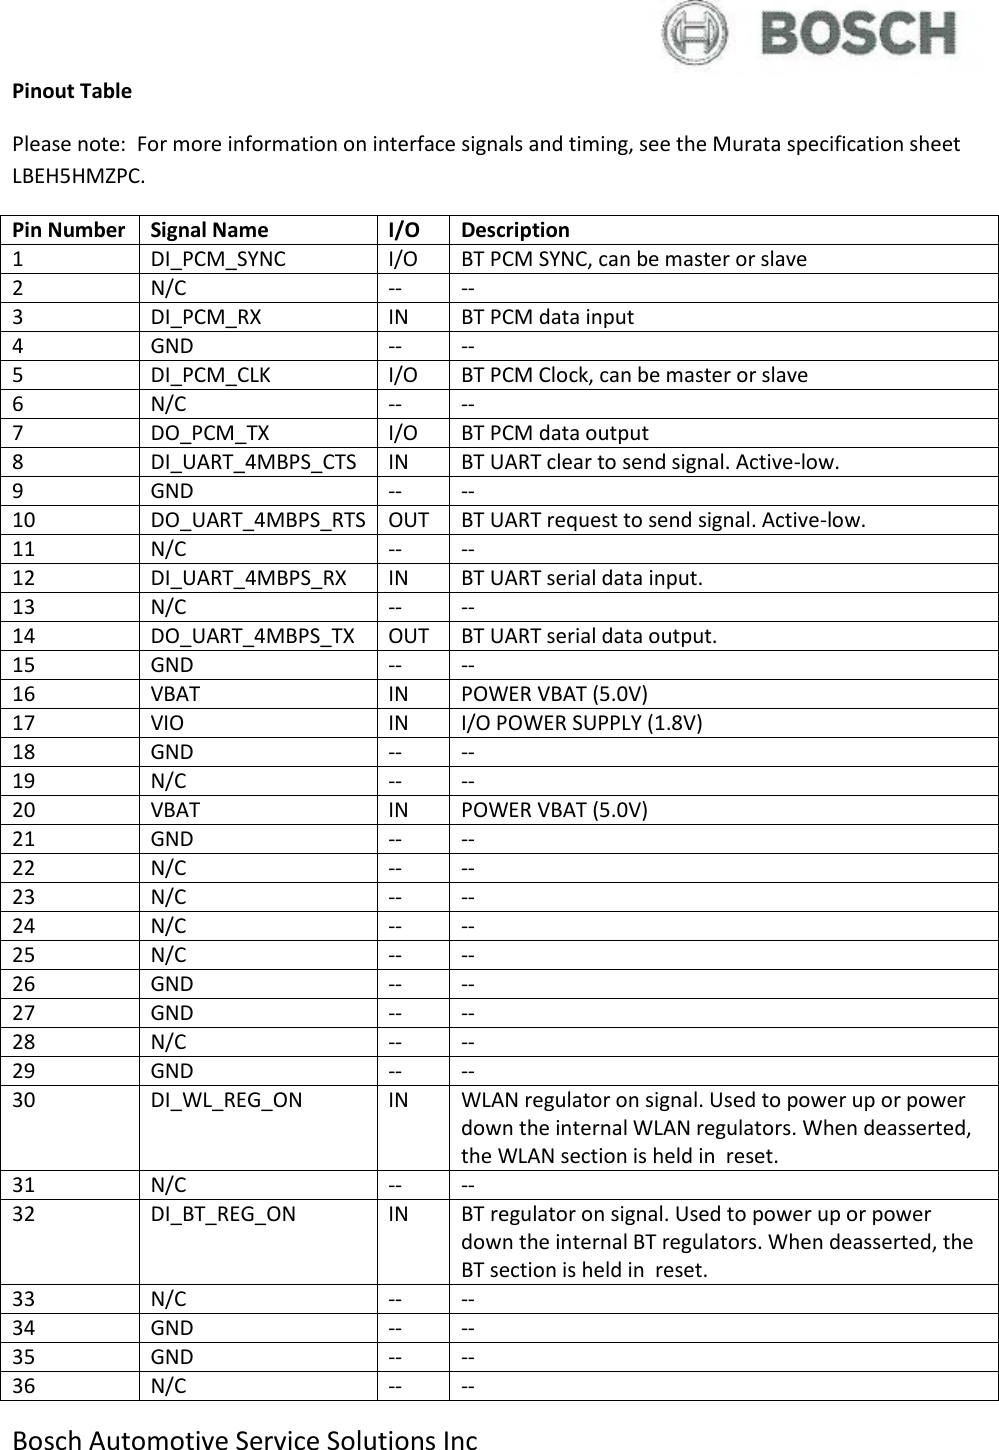  Bosch Automotive Service Solutions Inc  Pinout Table Please note:  For more information on interface signals and timing, see the Murata specification sheet LBEH5HMZPC. Pin Number Signal Name I/O Description 1 DI_PCM_SYNC I/O BT PCM SYNC, can be master or slave 2 N/C -- -- 3 DI_PCM_RX IN BT PCM data input 4 GND -- -- 5 DI_PCM_CLK I/O BT PCM Clock, can be master or slave 6 N/C -- -- 7 DO_PCM_TX I/O BT PCM data output 8 DI_UART_4MBPS_CTS IN BT UART clear to send signal. Active-low. 9 GND -- -- 10 DO_UART_4MBPS_RTS OUT BT UART request to send signal. Active-low. 11 N/C -- -- 12 DI_UART_4MBPS_RX IN BT UART serial data input. 13 N/C -- -- 14 DO_UART_4MBPS_TX OUT BT UART serial data output. 15 GND -- -- 16 VBAT IN POWER VBAT (5.0V) 17 VIO IN I/O POWER SUPPLY (1.8V)  18 GND -- -- 19 N/C -- -- 20 VBAT IN POWER VBAT (5.0V) 21 GND -- -- 22 N/C -- -- 23 N/C -- -- 24 N/C -- -- 25 N/C -- -- 26 GND -- -- 27 GND -- -- 28 N/C -- -- 29 GND -- -- 30 DI_WL_REG_ON IN WLAN regulator on signal. Used to power up or power down the internal WLAN regulators. When deasserted, the WLAN section is held in  reset. 31 N/C -- -- 32 DI_BT_REG_ON IN BT regulator on signal. Used to power up or power down the internal BT regulators. When deasserted, the BT section is held in  reset.  33 N/C -- -- 34 GND -- -- 35 GND -- -- 36 N/C -- -- 